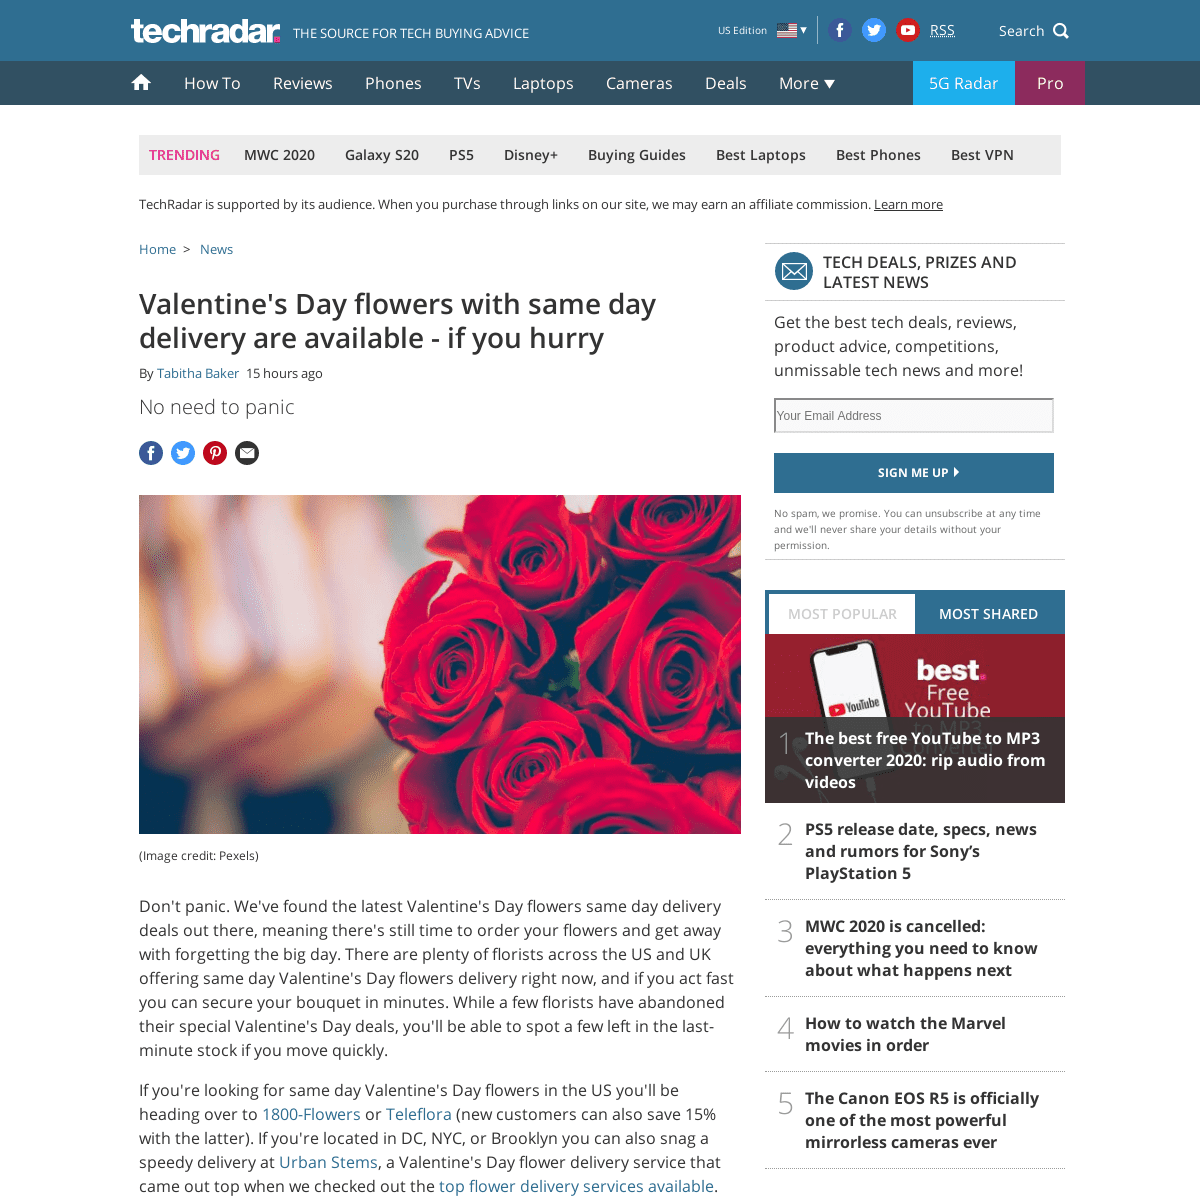 A complete backup of www.techradar.com/news/valentines-day-flowers-same-day-delivery-cheap